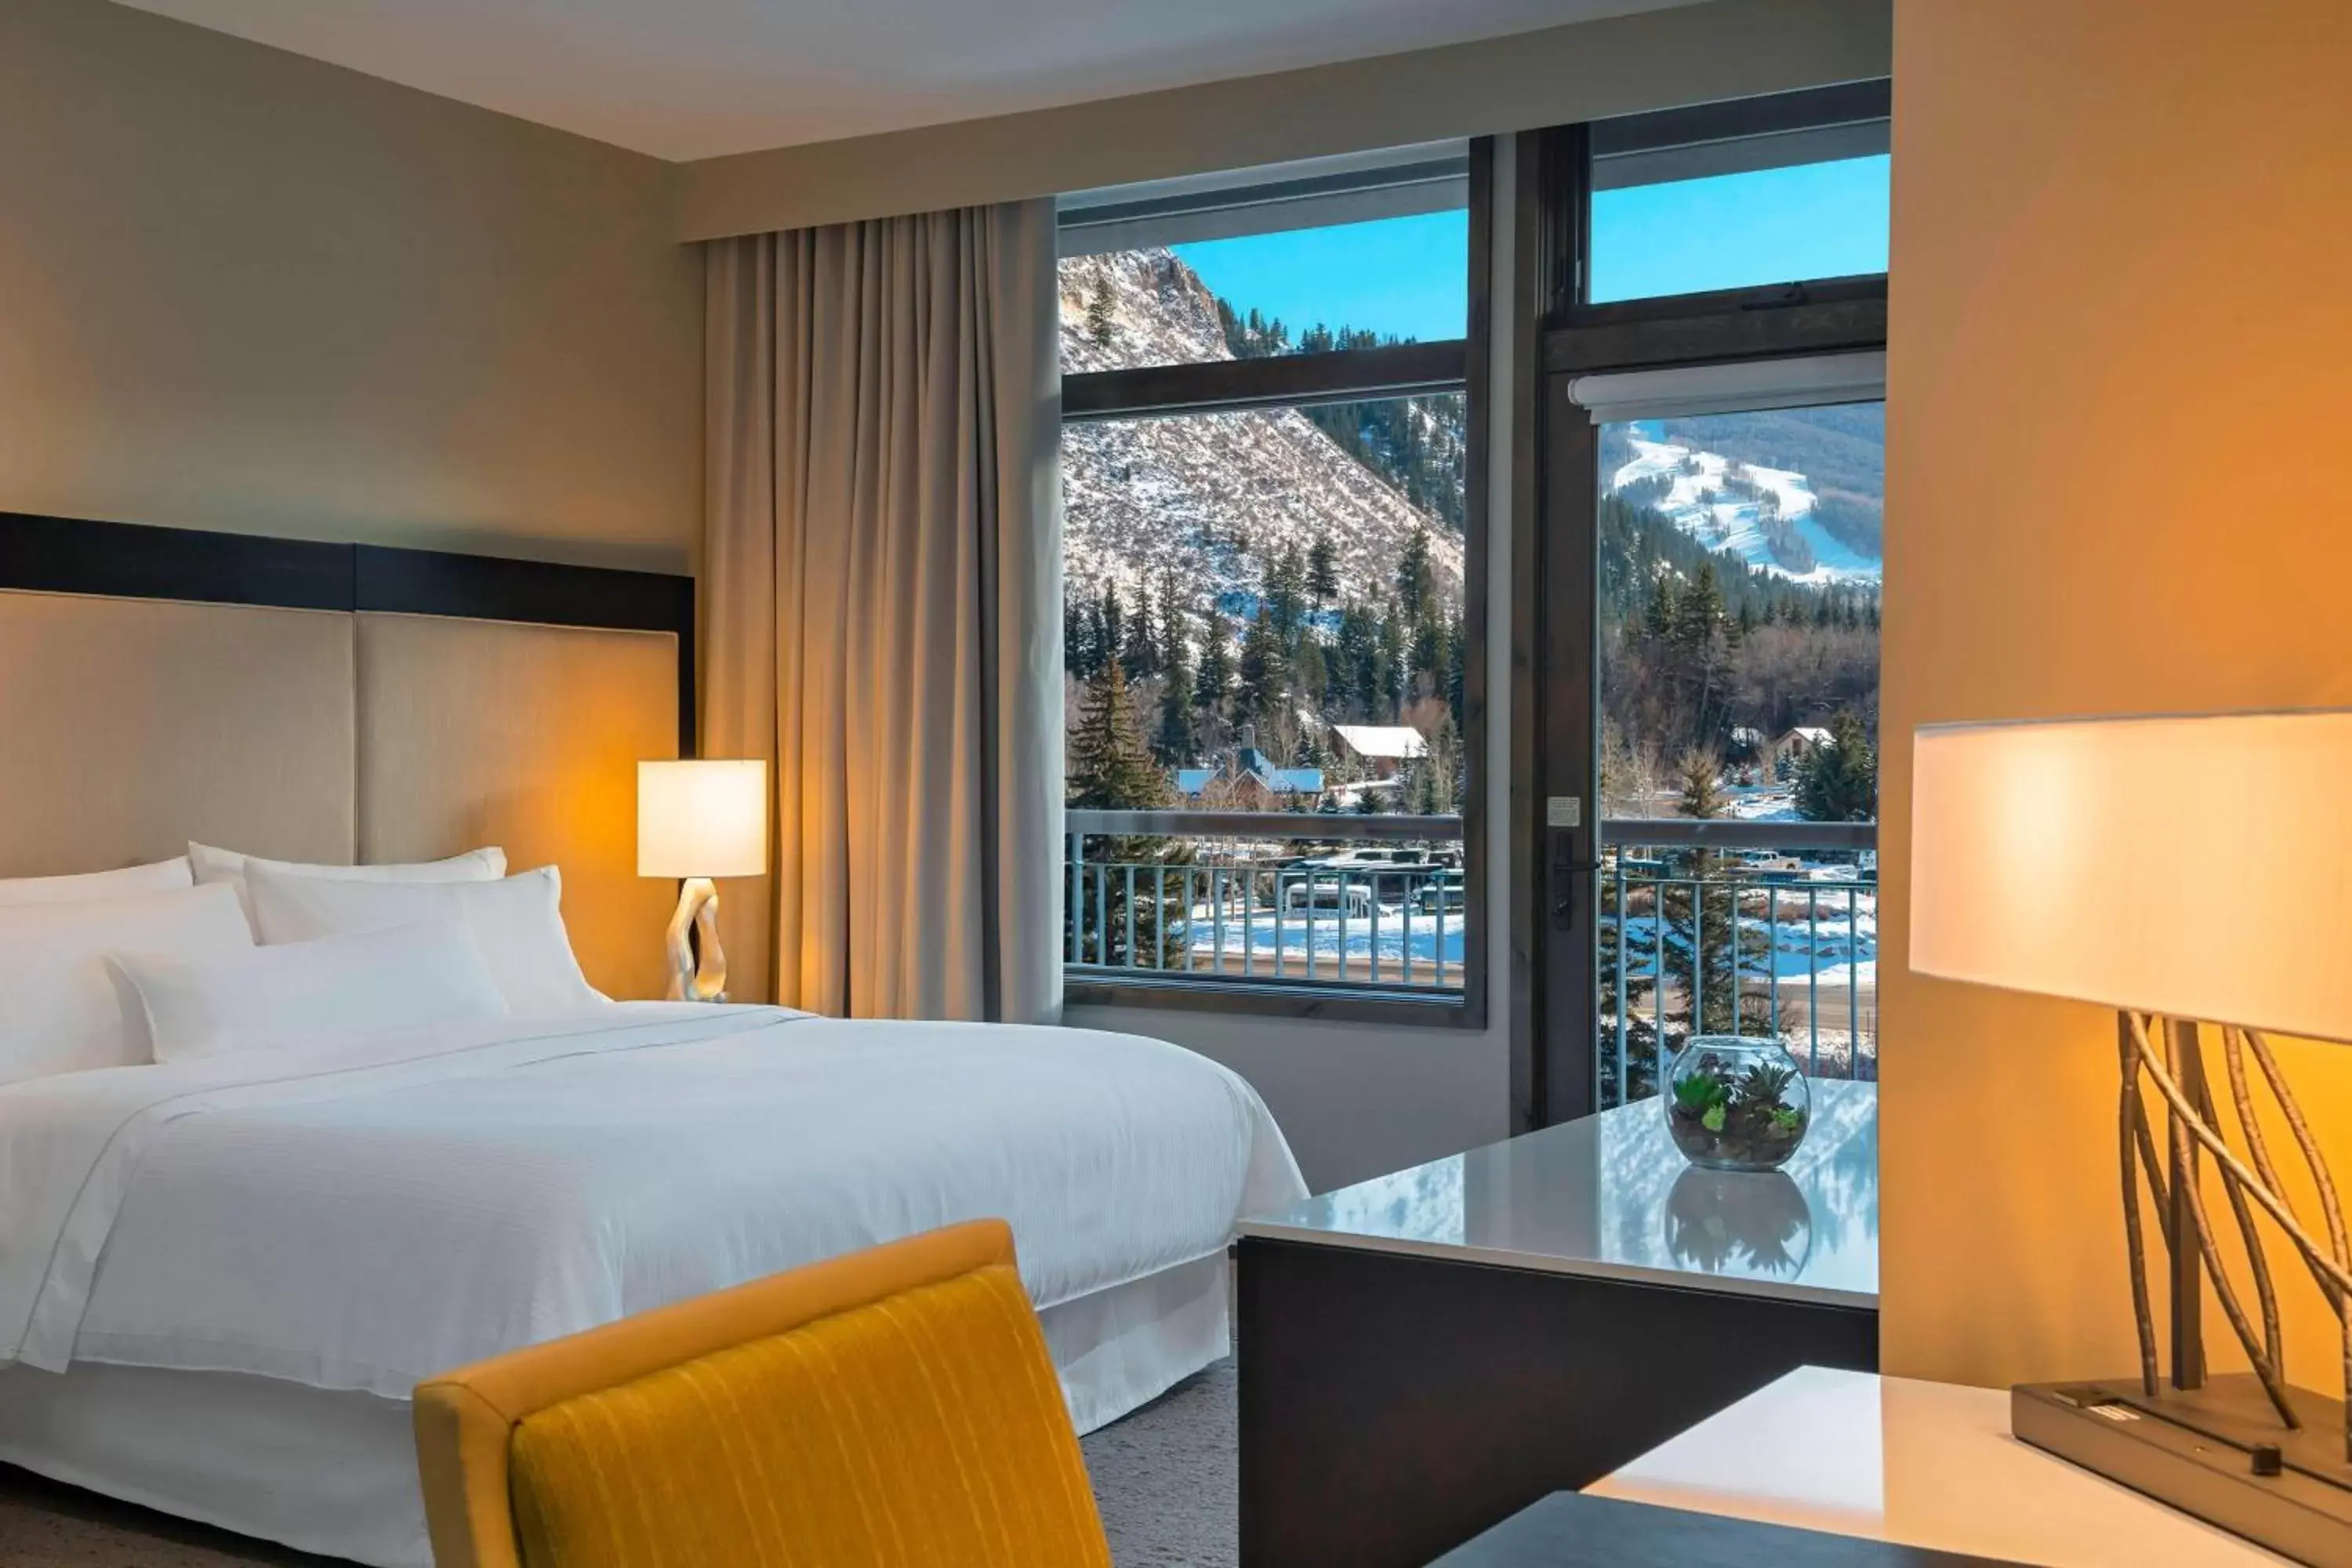 Bedroom in The Westin Riverfront Resort & Spa, Avon, Vail Valley